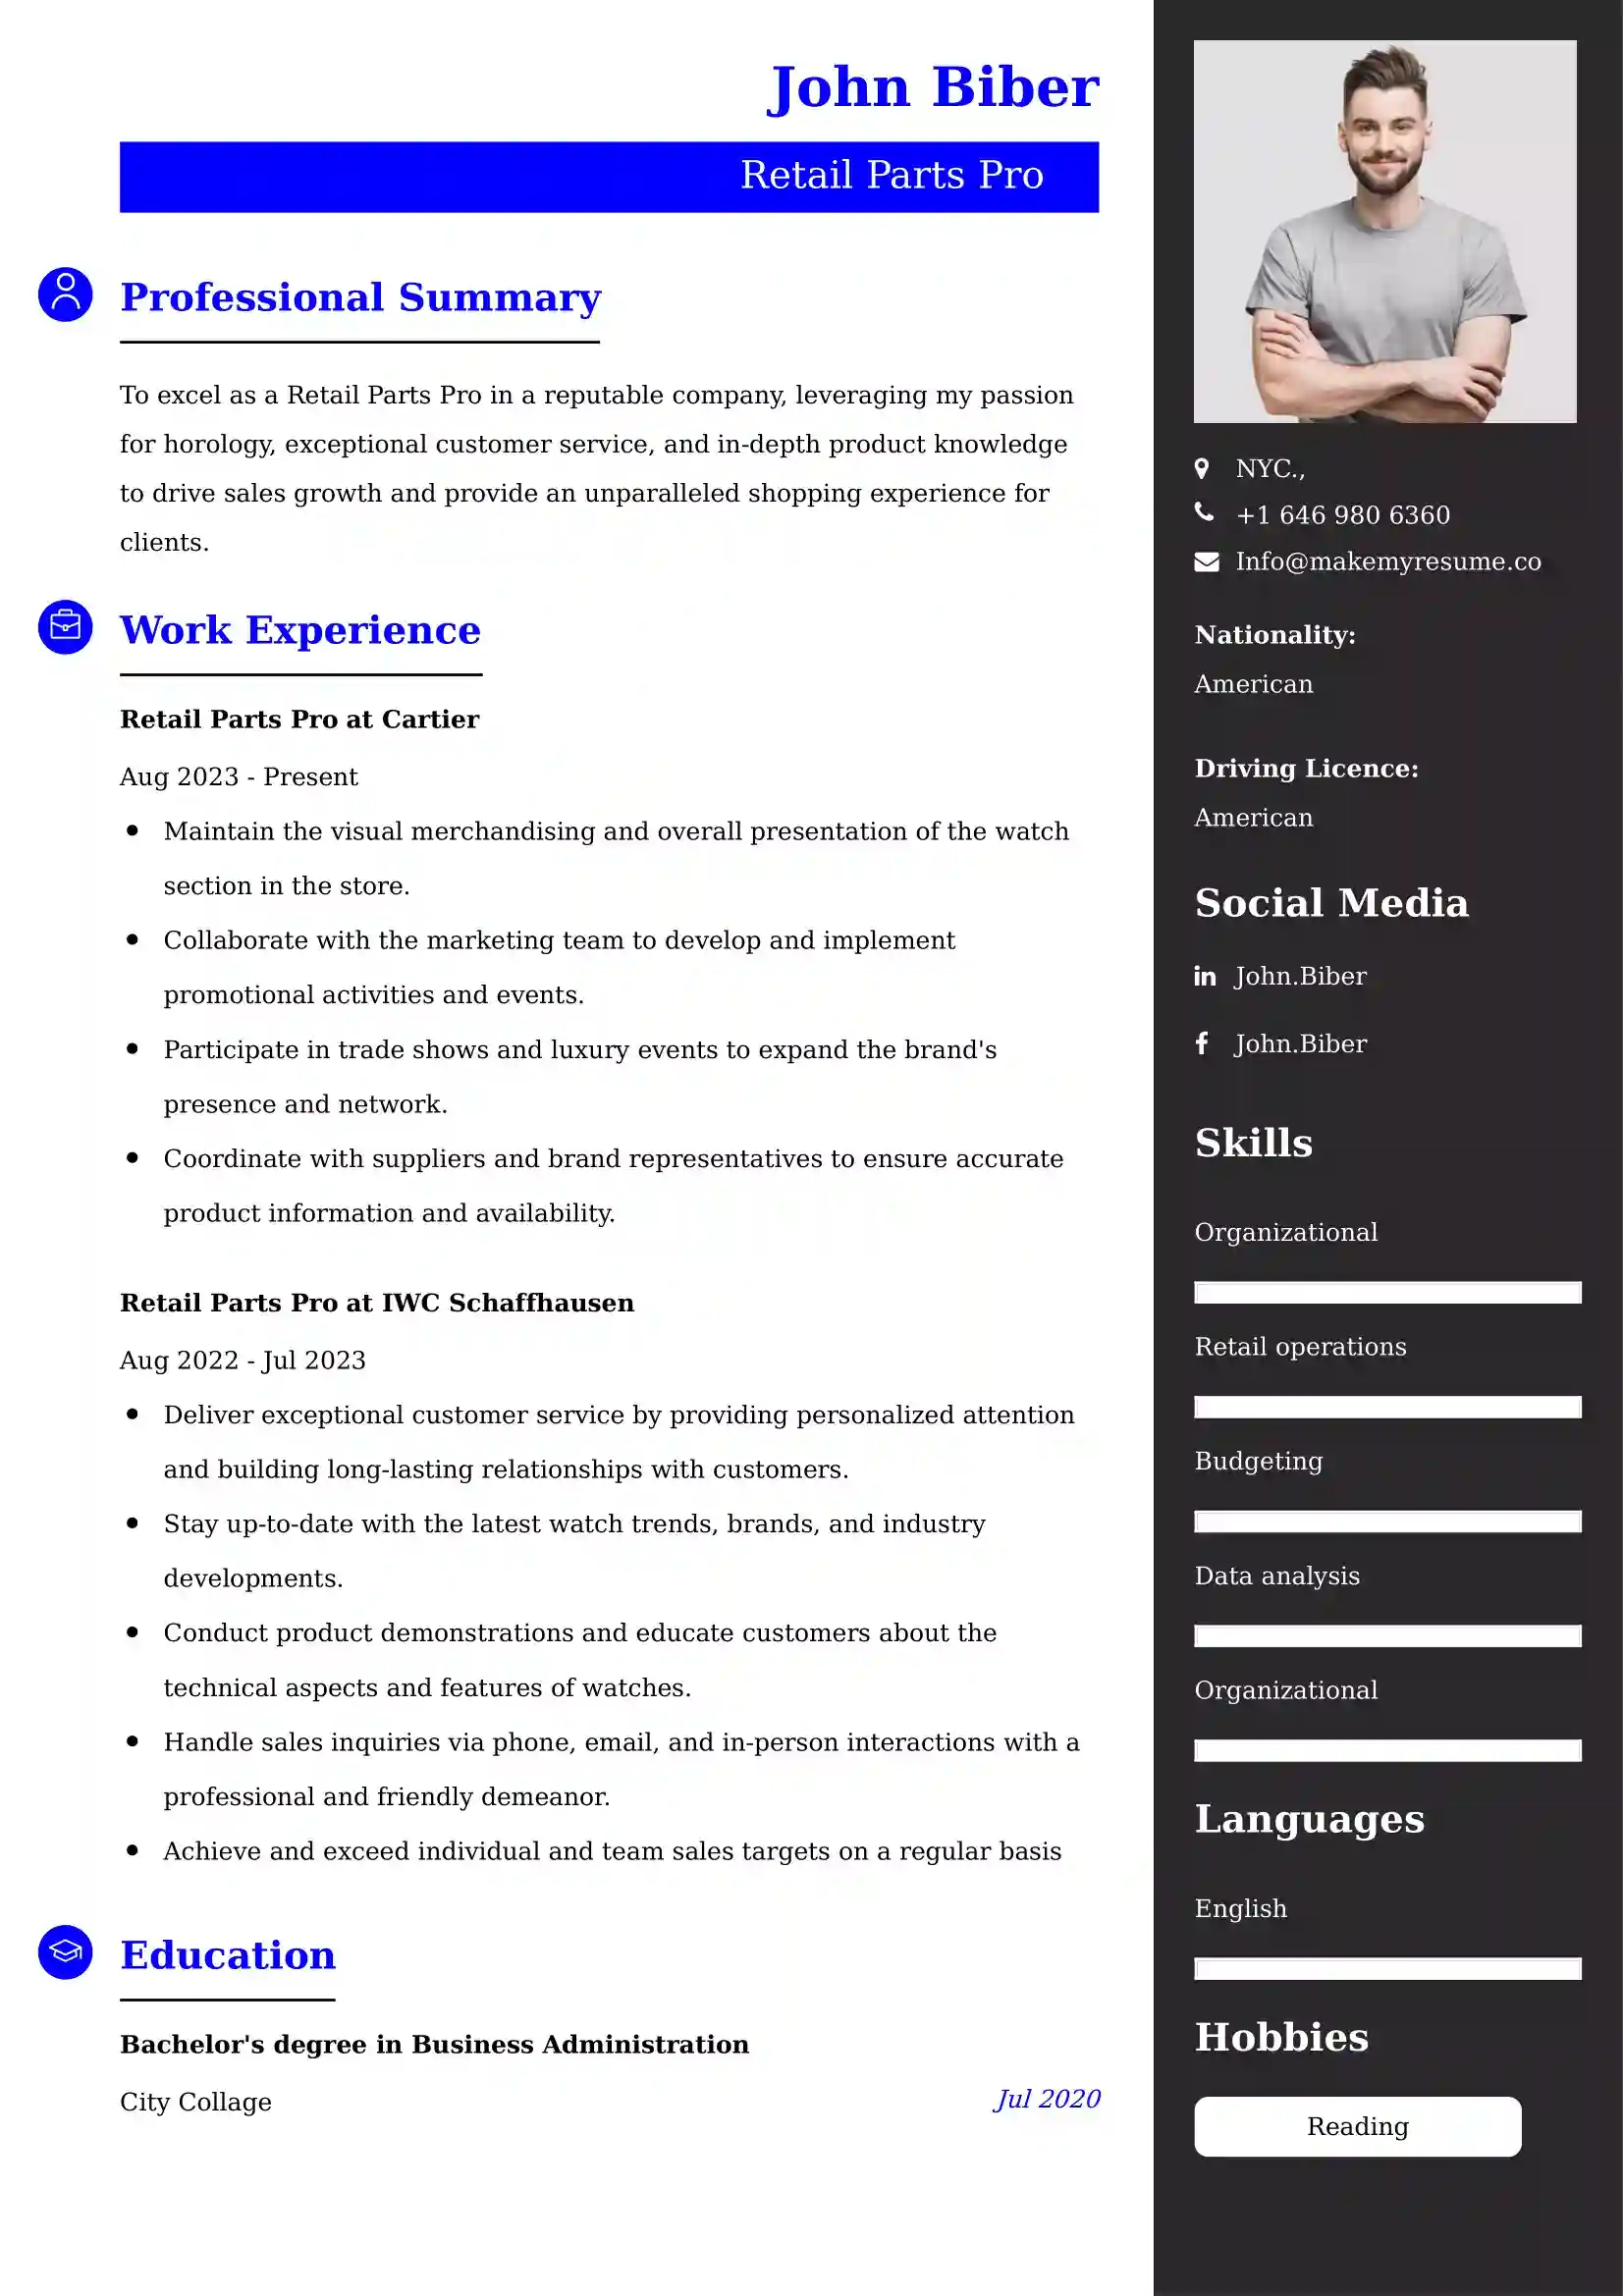 Best Retail Parts Pro Resume Examples for UK